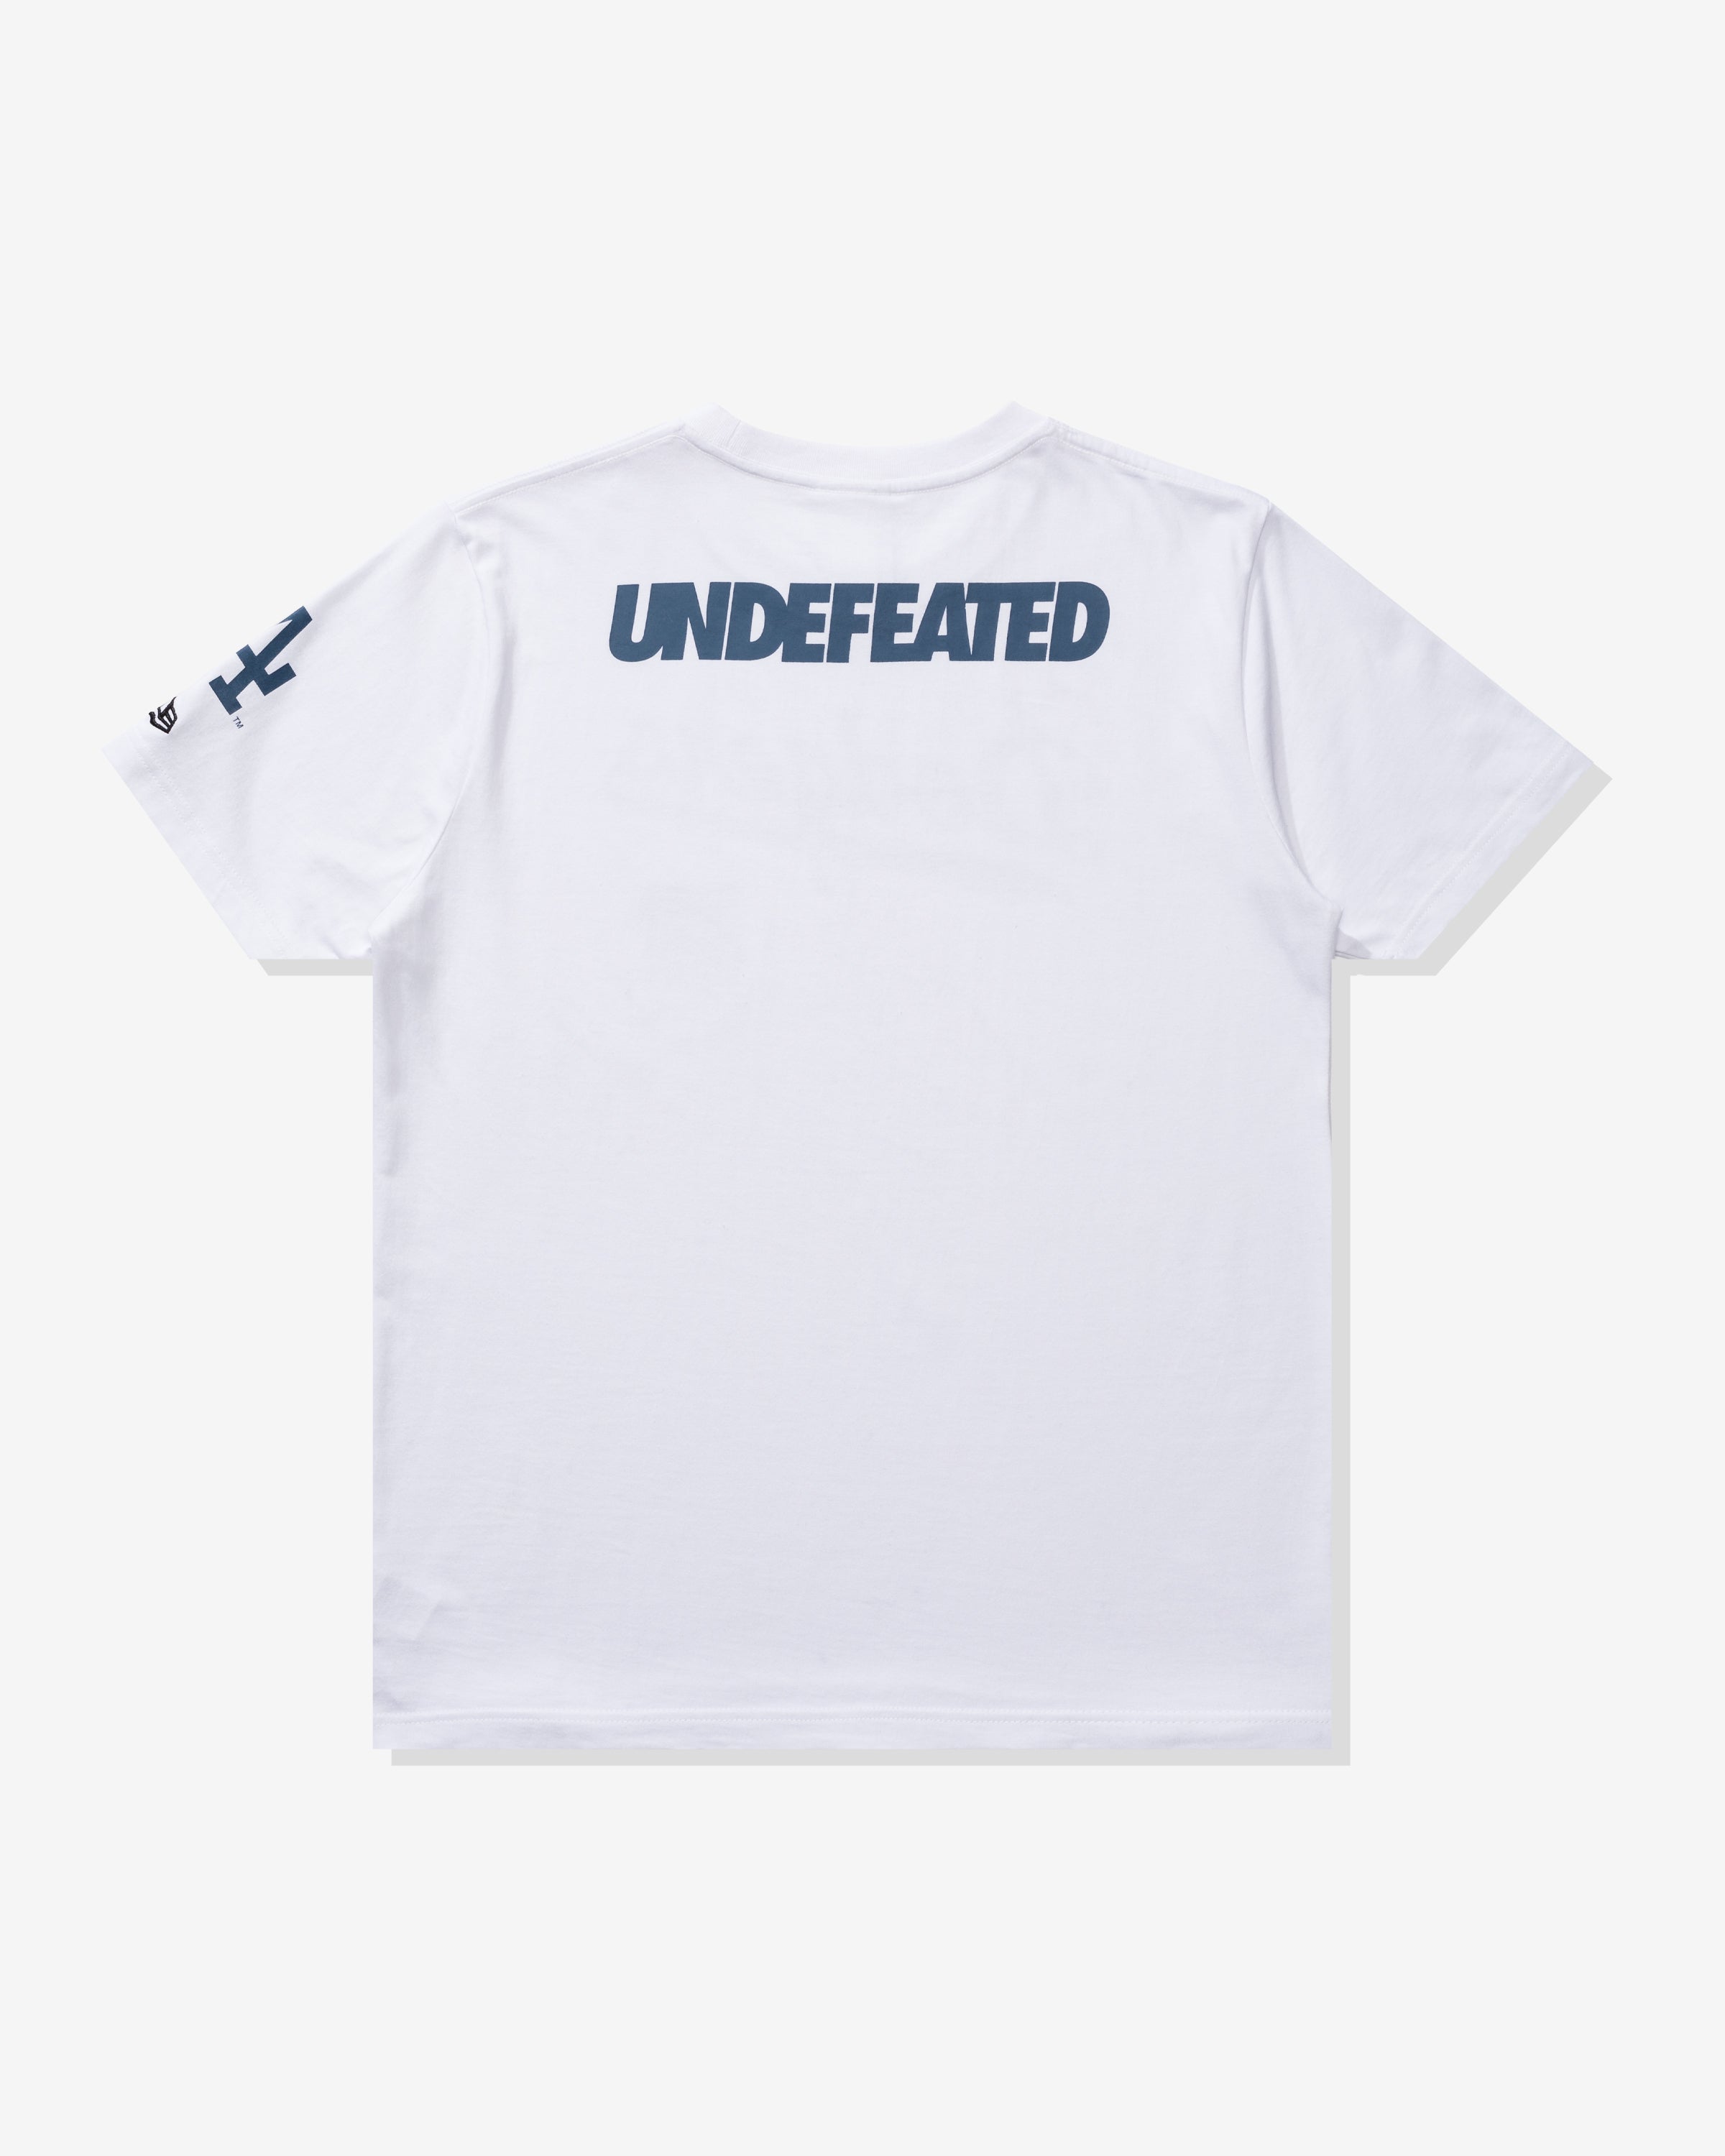 UNDEFEATED x New Era LA Dodgers Collection 10.22.22